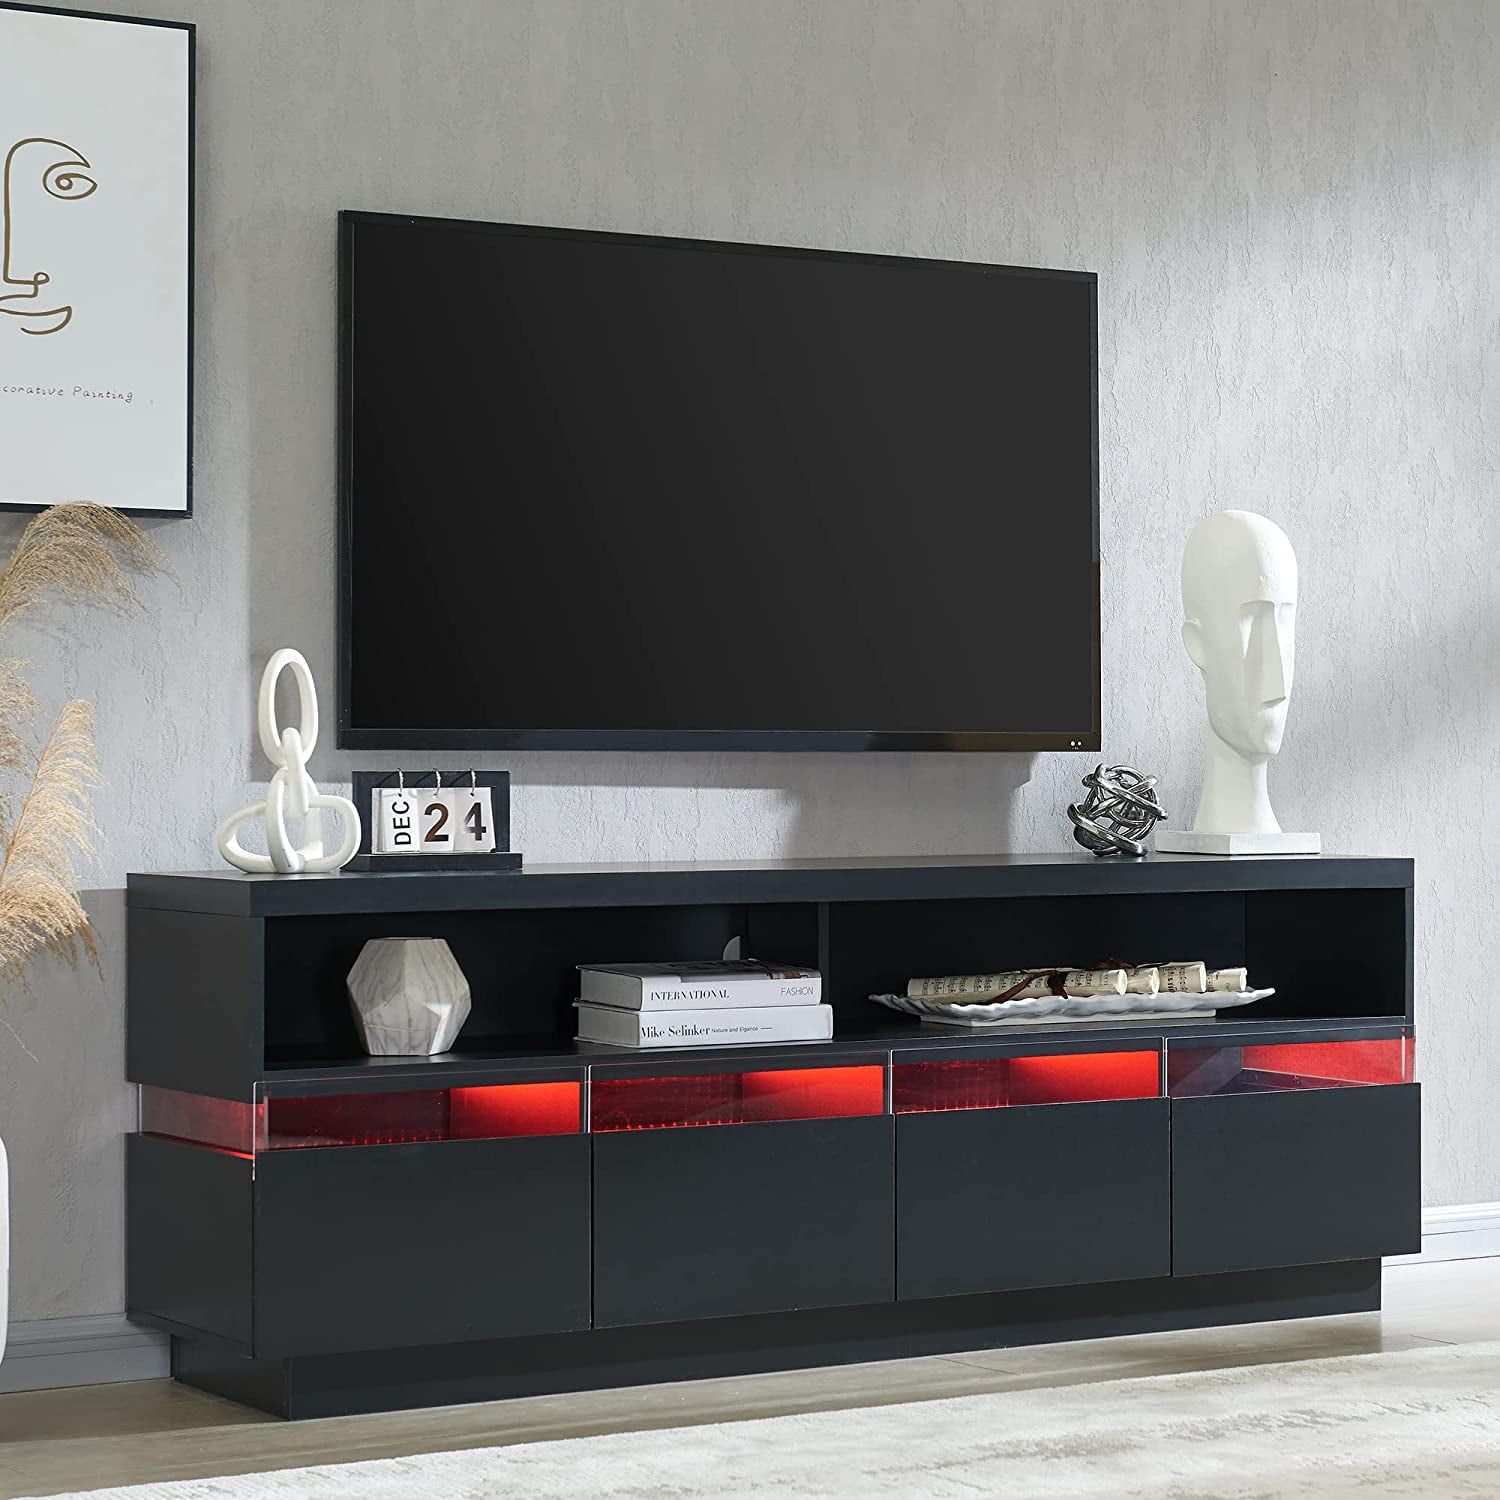 Okd Tv Stand For Tvs Up To 75", Entertainment Center, With Rgb Led Lights  And Storage Shelves For Living Room,Solid Black – Walmart Throughout Black Rgb Entertainment Centers (View 5 of 15)